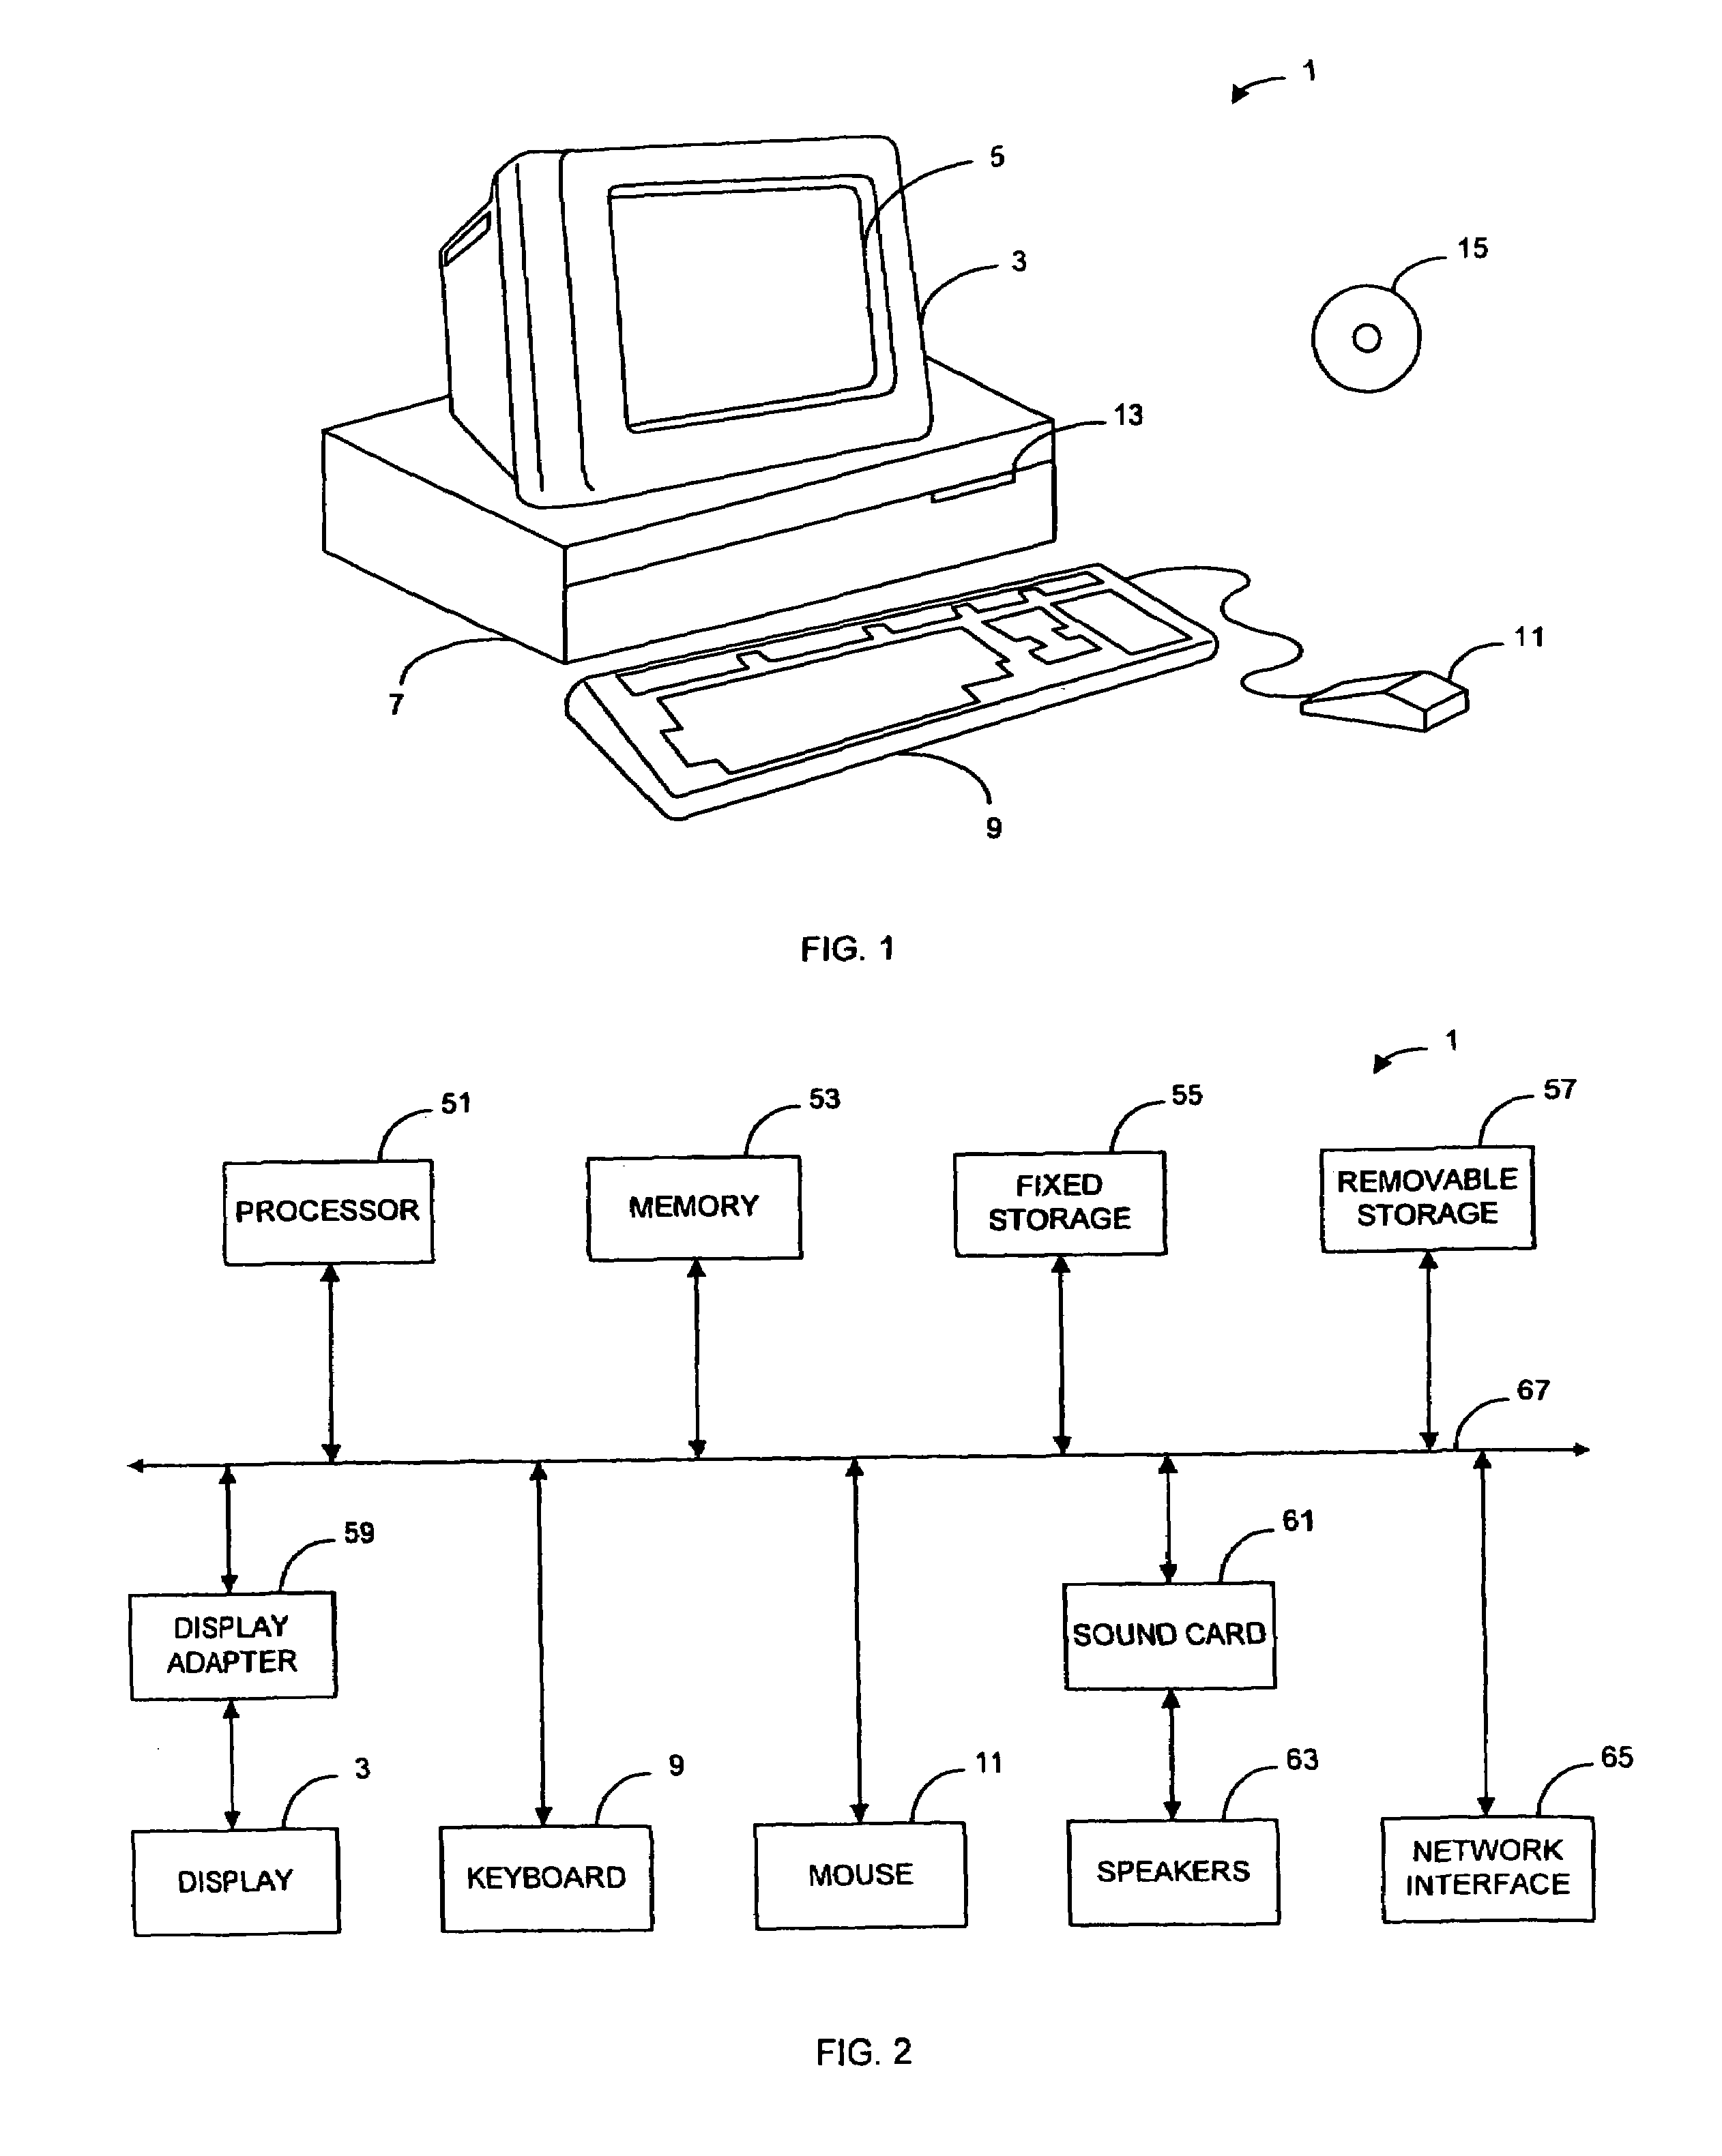 Distributed nonstop architecture for an event processing system